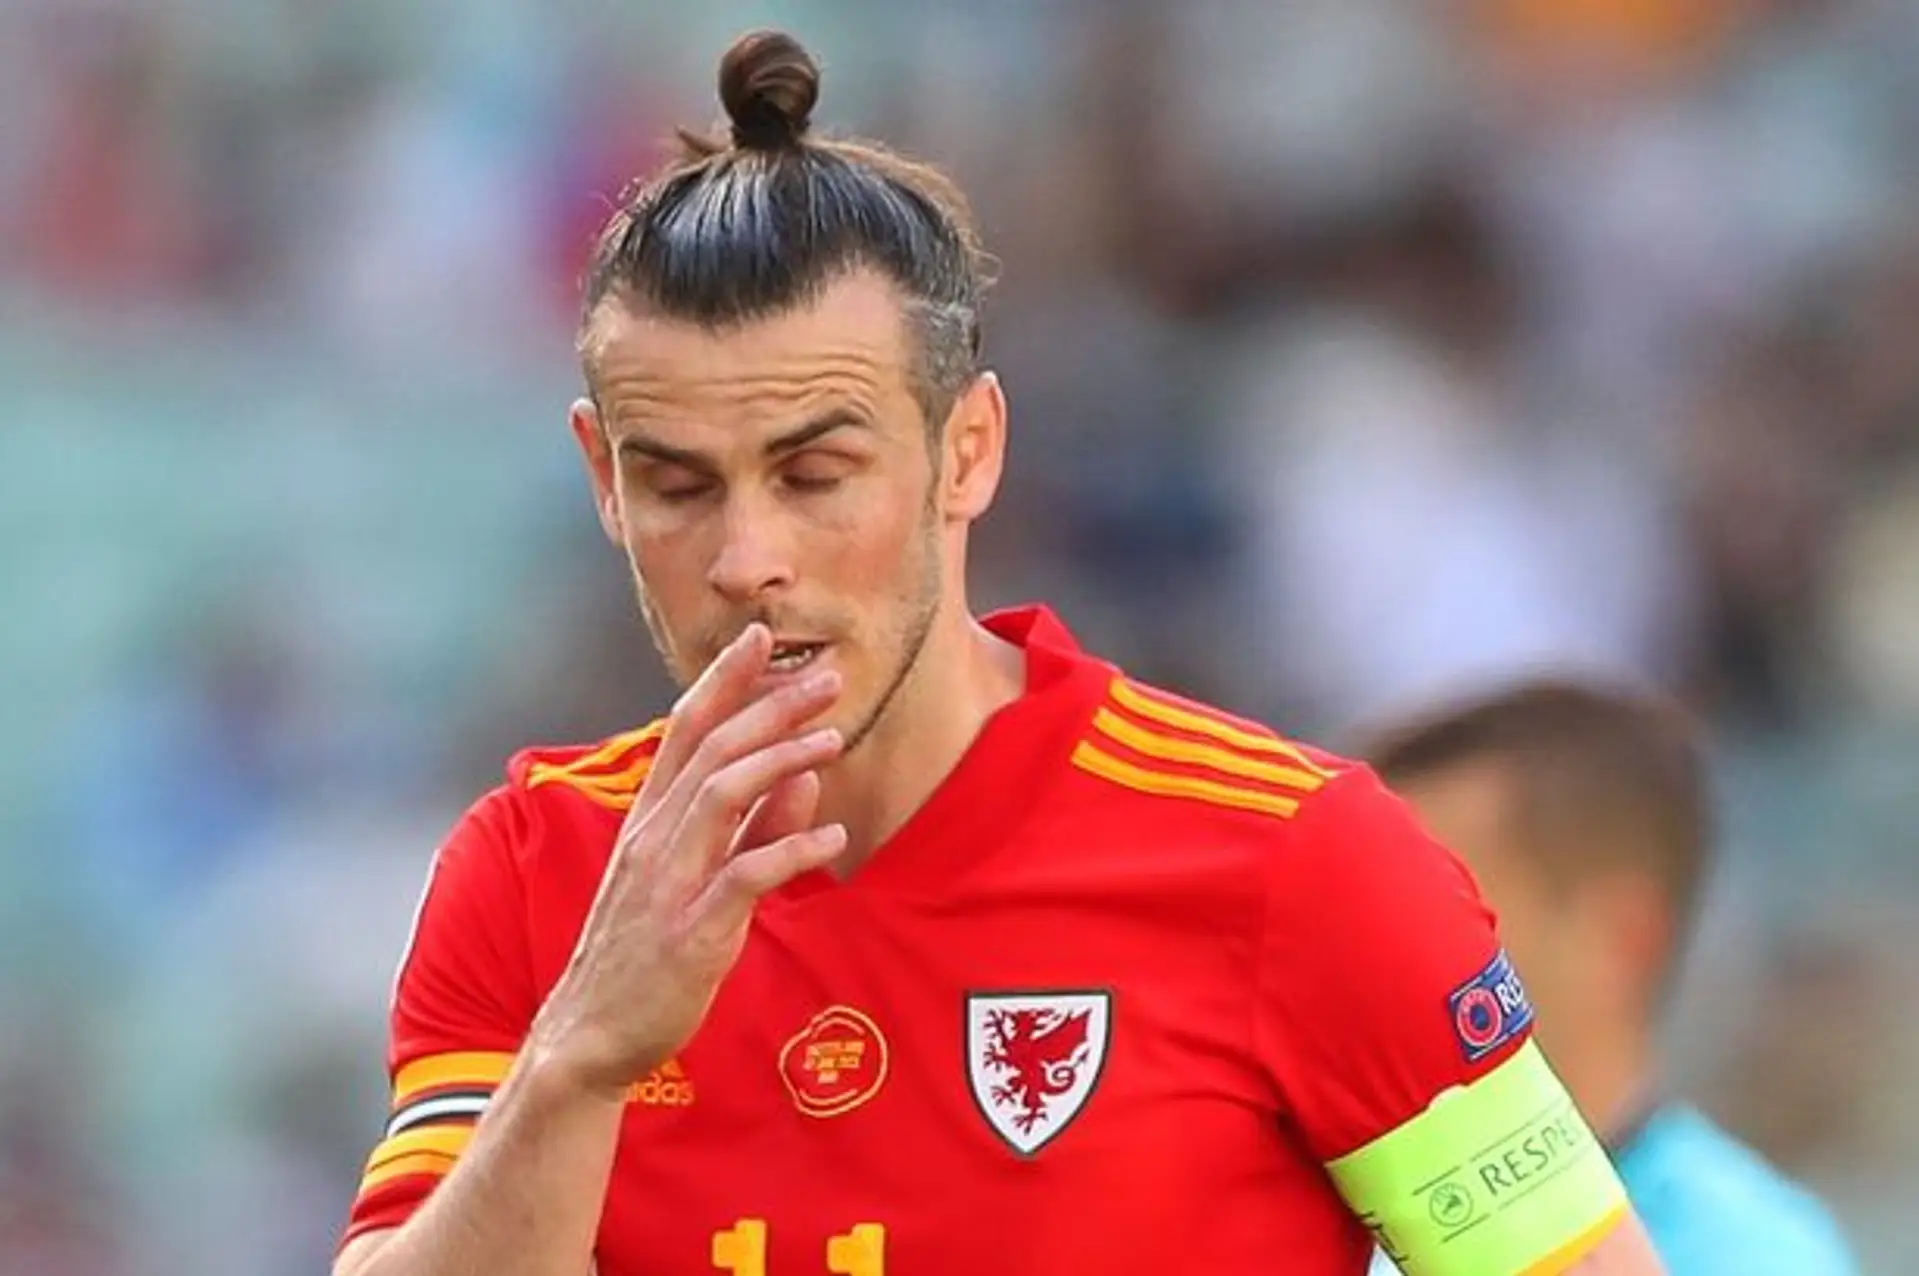 Bale sees official Euro 2020 rating plunge after lacklustre opening display